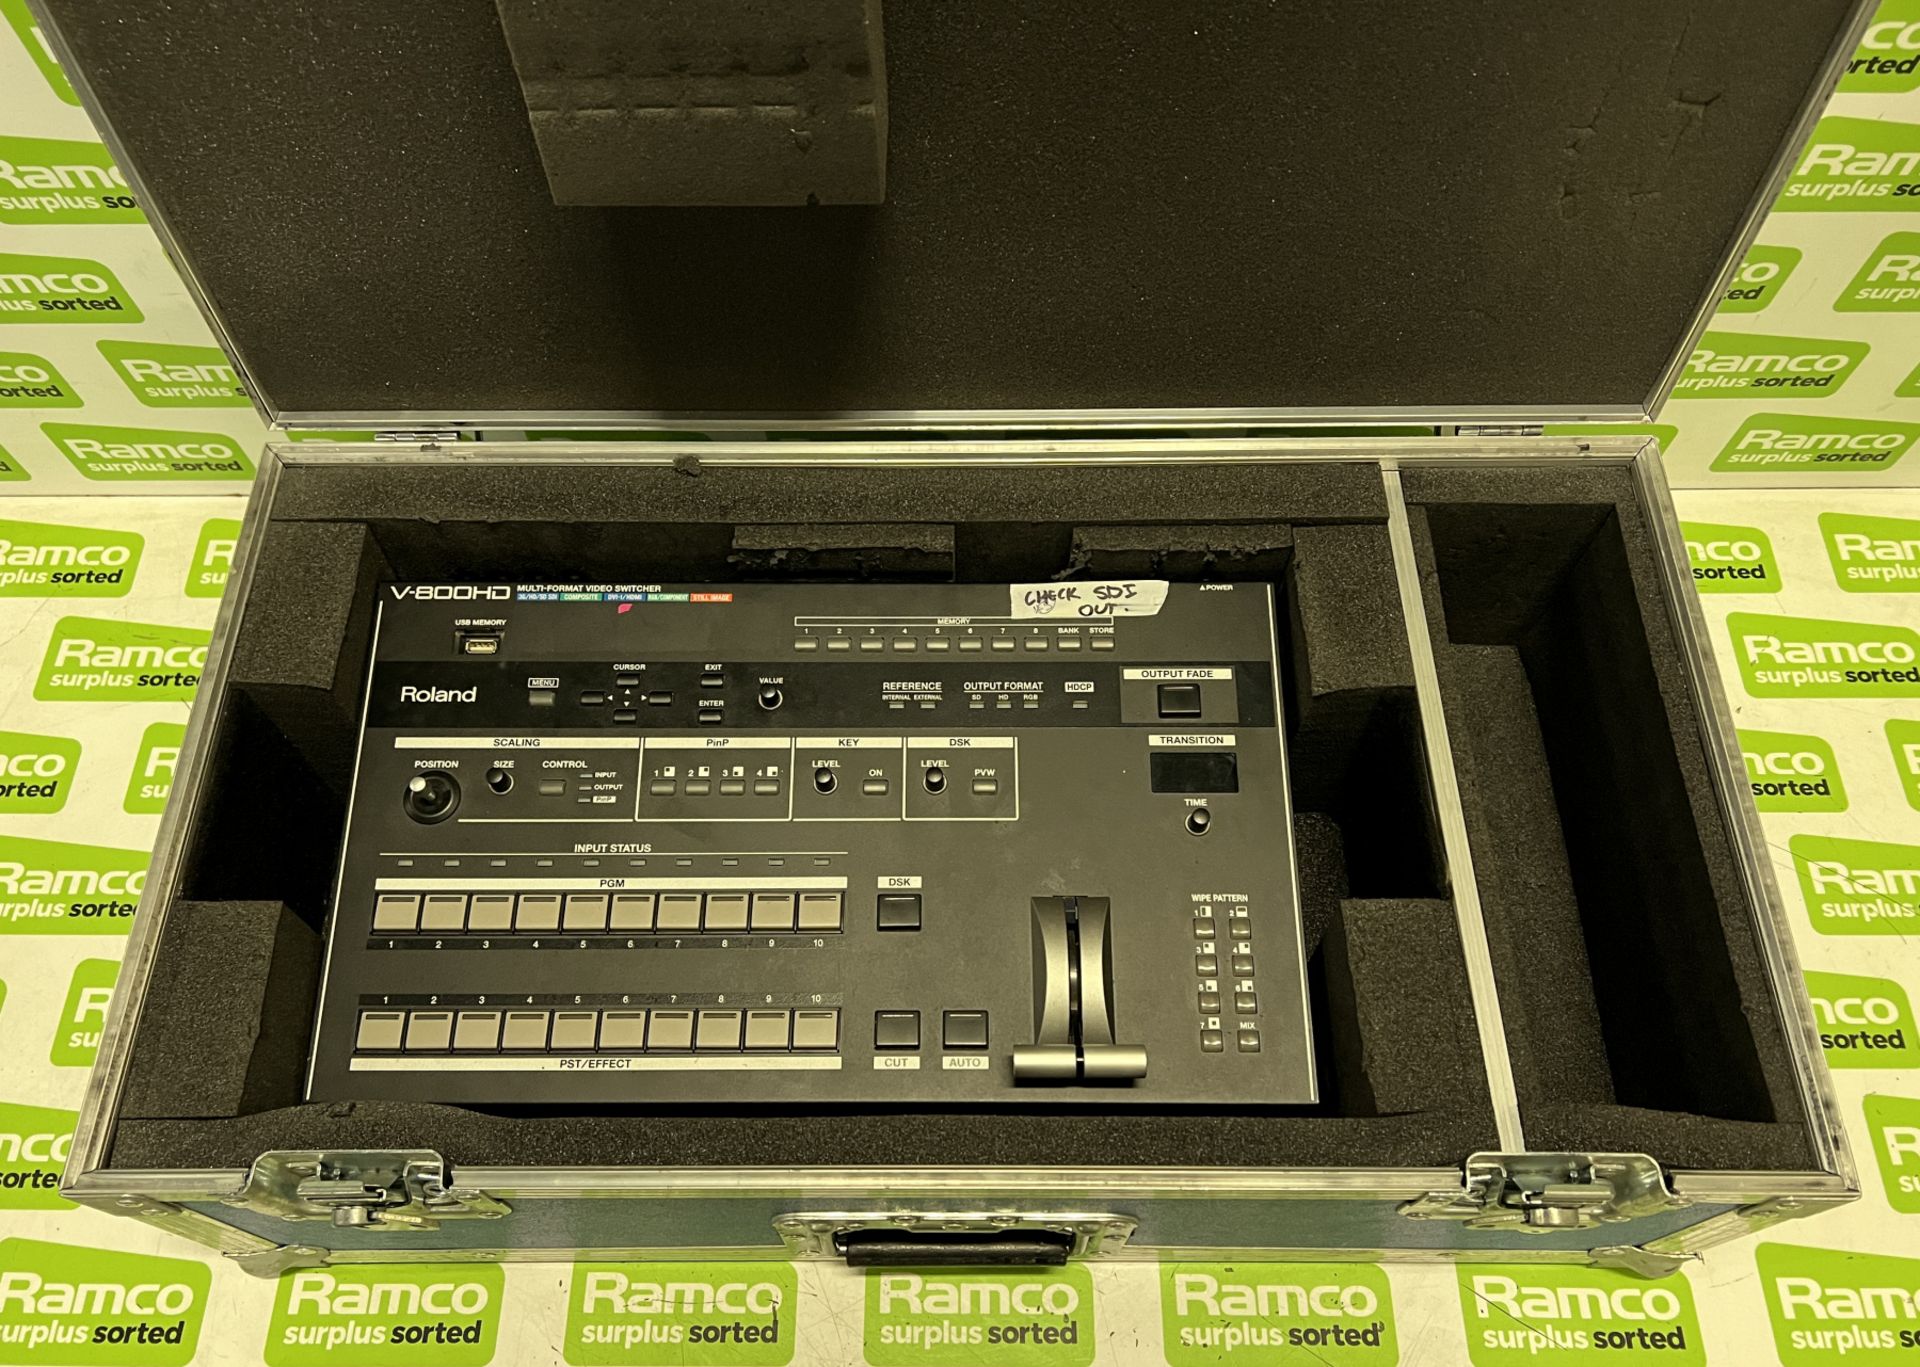 Roland V800HD vision mixer in flight case - case dimensions: L 690 x W 370 x H 230mm - FAULTY OUTPUT - Image 8 of 8